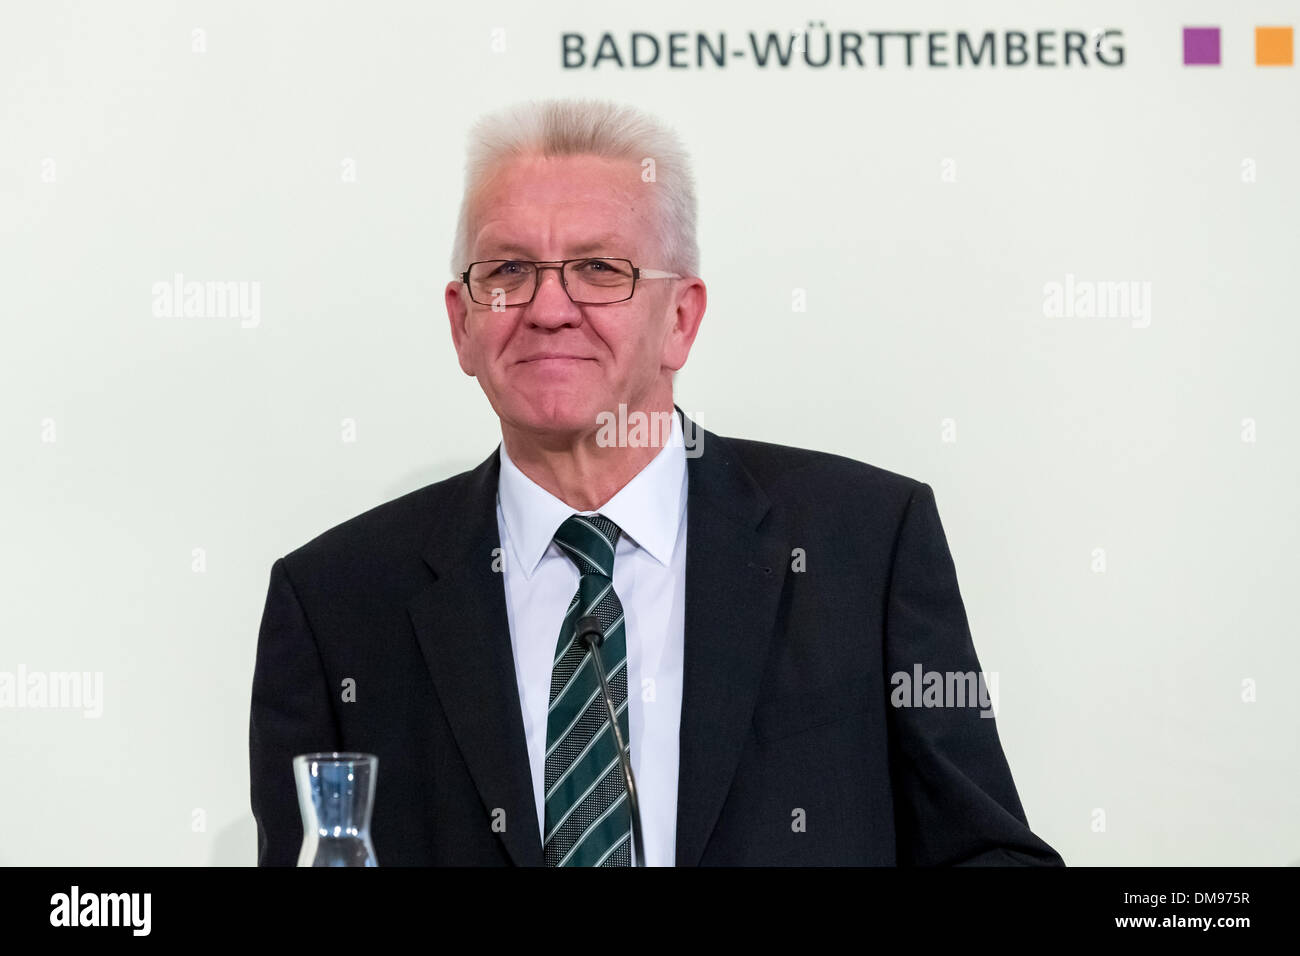 Berlin, Germany. 12th Dec, 2013. Press Conference with Prime Minister Kretschmann, Prime Minister Lieberknecht and Prime Minister Albig after Meeting/Conference of the heads of government of the Germany Federal states at the representation of Baden-Wuerttemberg in Berlin. / Picture: Winfried Kretschmann (Green), Old President of the Conference of Prime Ministers and Minister-President of Baden-WÃƒÂ¼rttemberg, in Berlin, on December 12, 2013.Photo: Reynaldo Paganelli/NurPhoto Credit:  Reynaldo Paganelli/NurPhoto/ZUMAPRESS.com/Alamy Live News Stock Photo